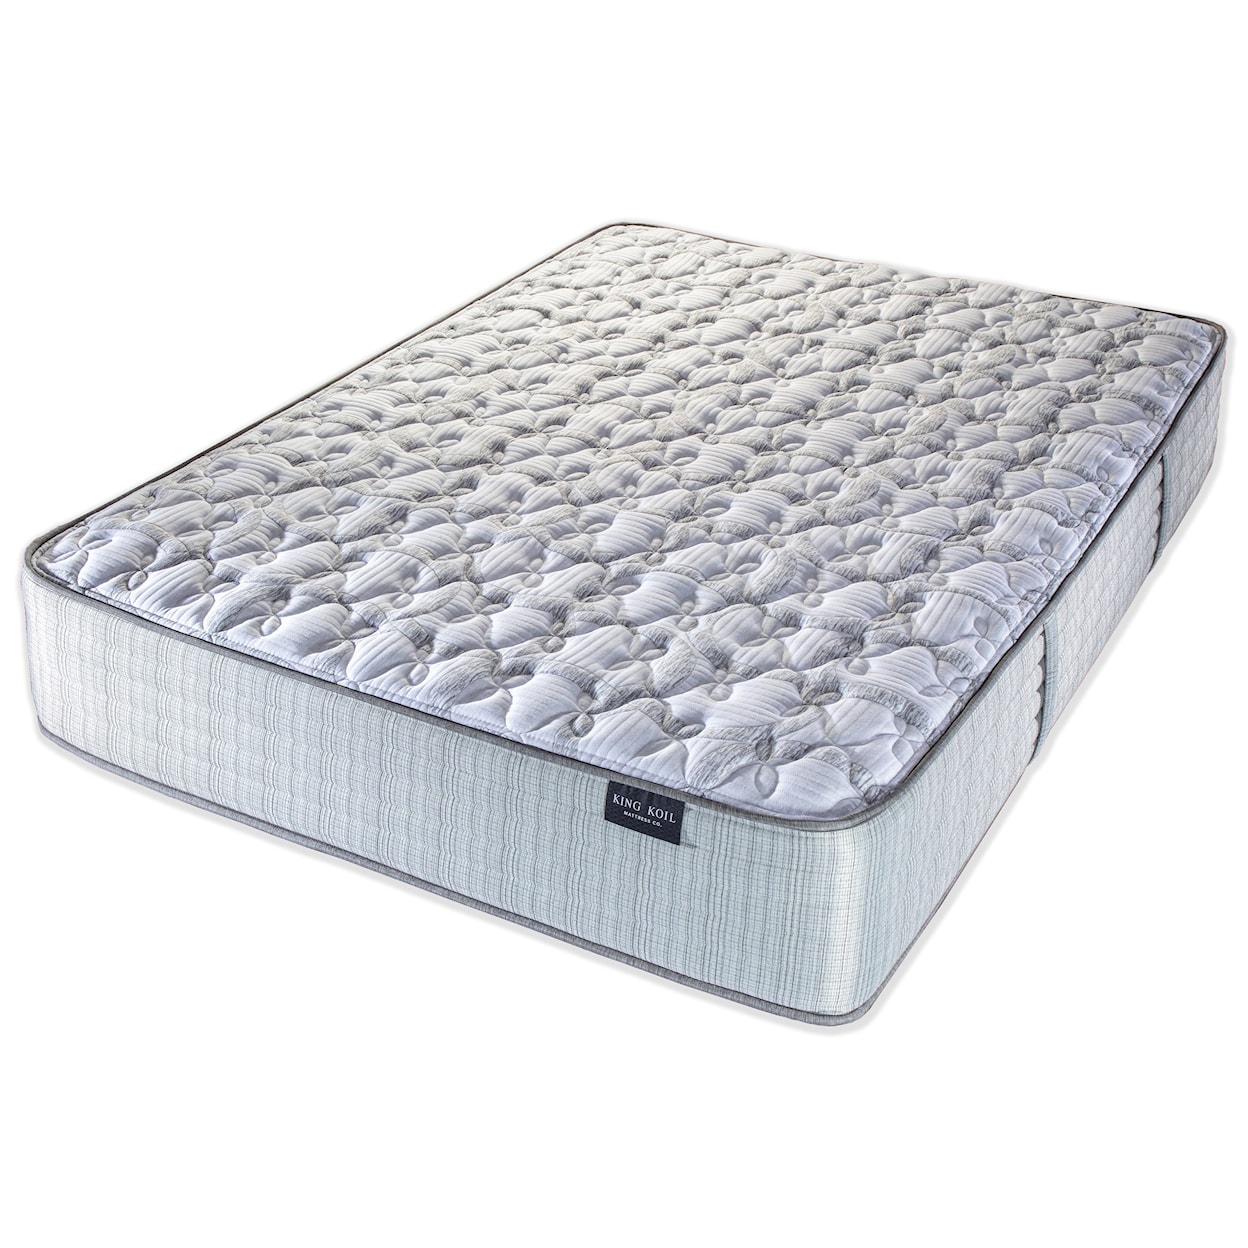 King Koil Harlan Extra Firm Twin Extra Firm 13" Extra Firm Mattress